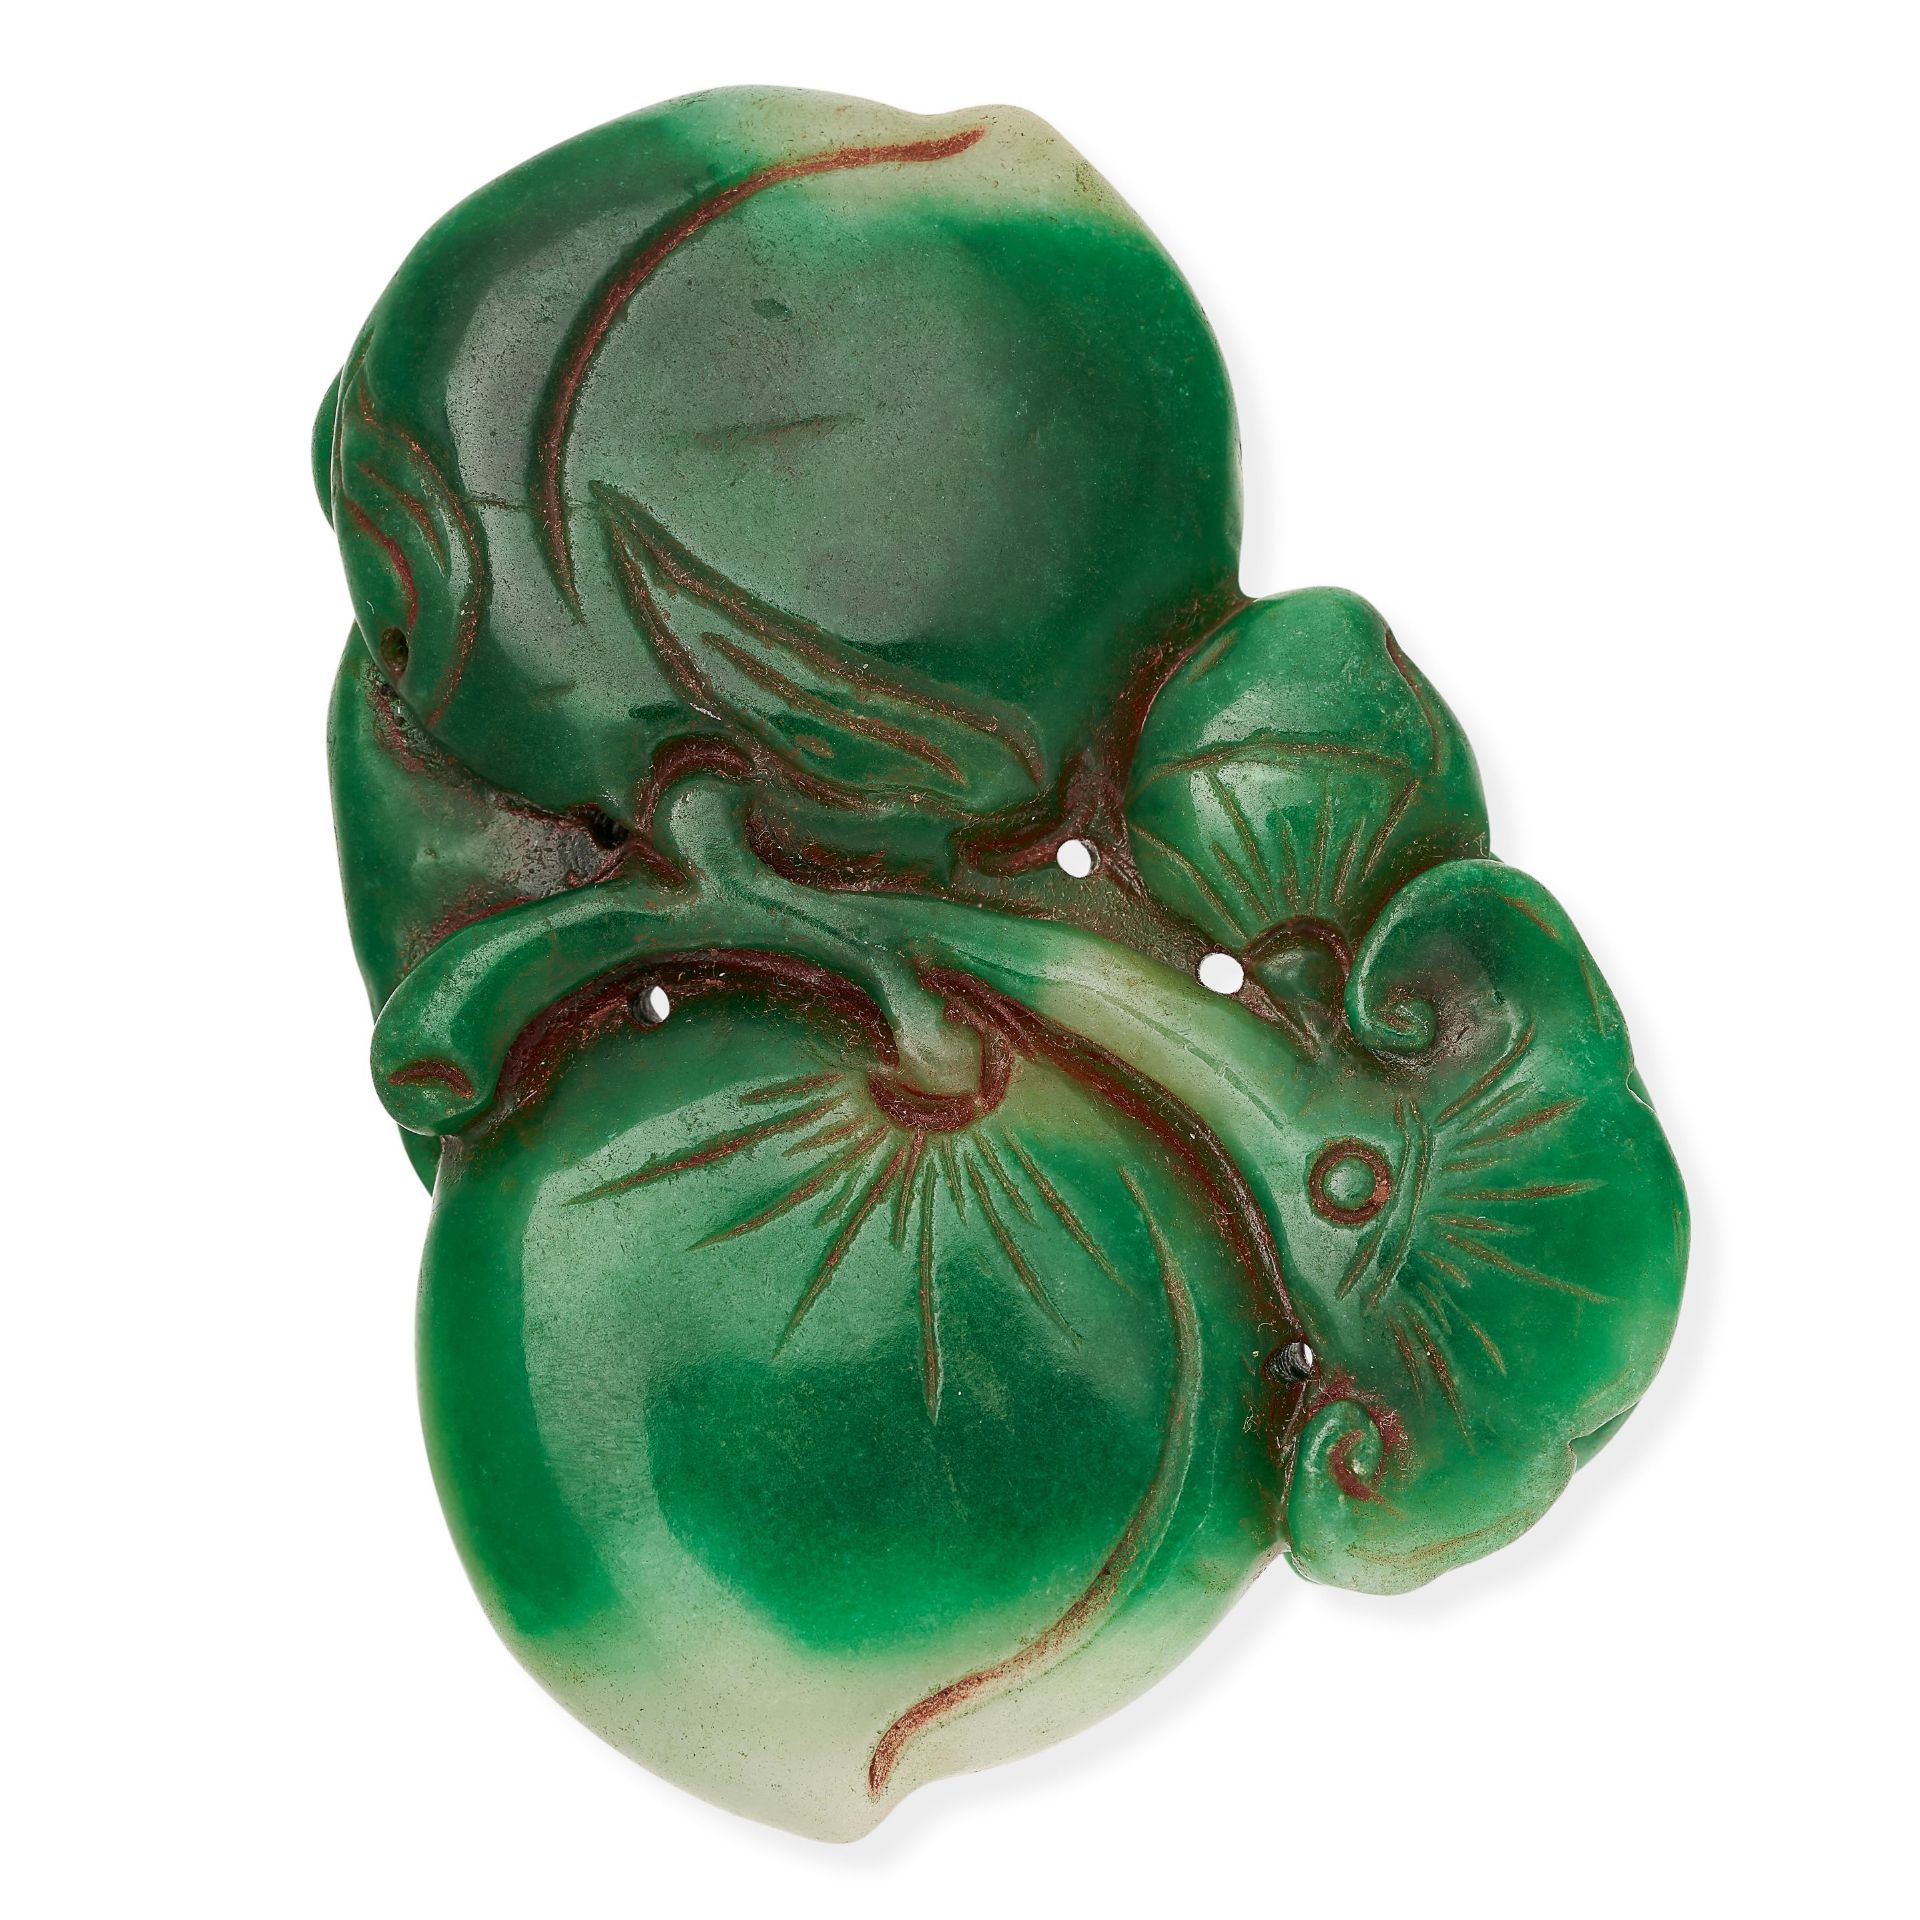 NO RESERVE - A CARVED JADEITE JADE PLAQUE carved in the Chinese style depicting two monkeys climbing - Bild 2 aus 2